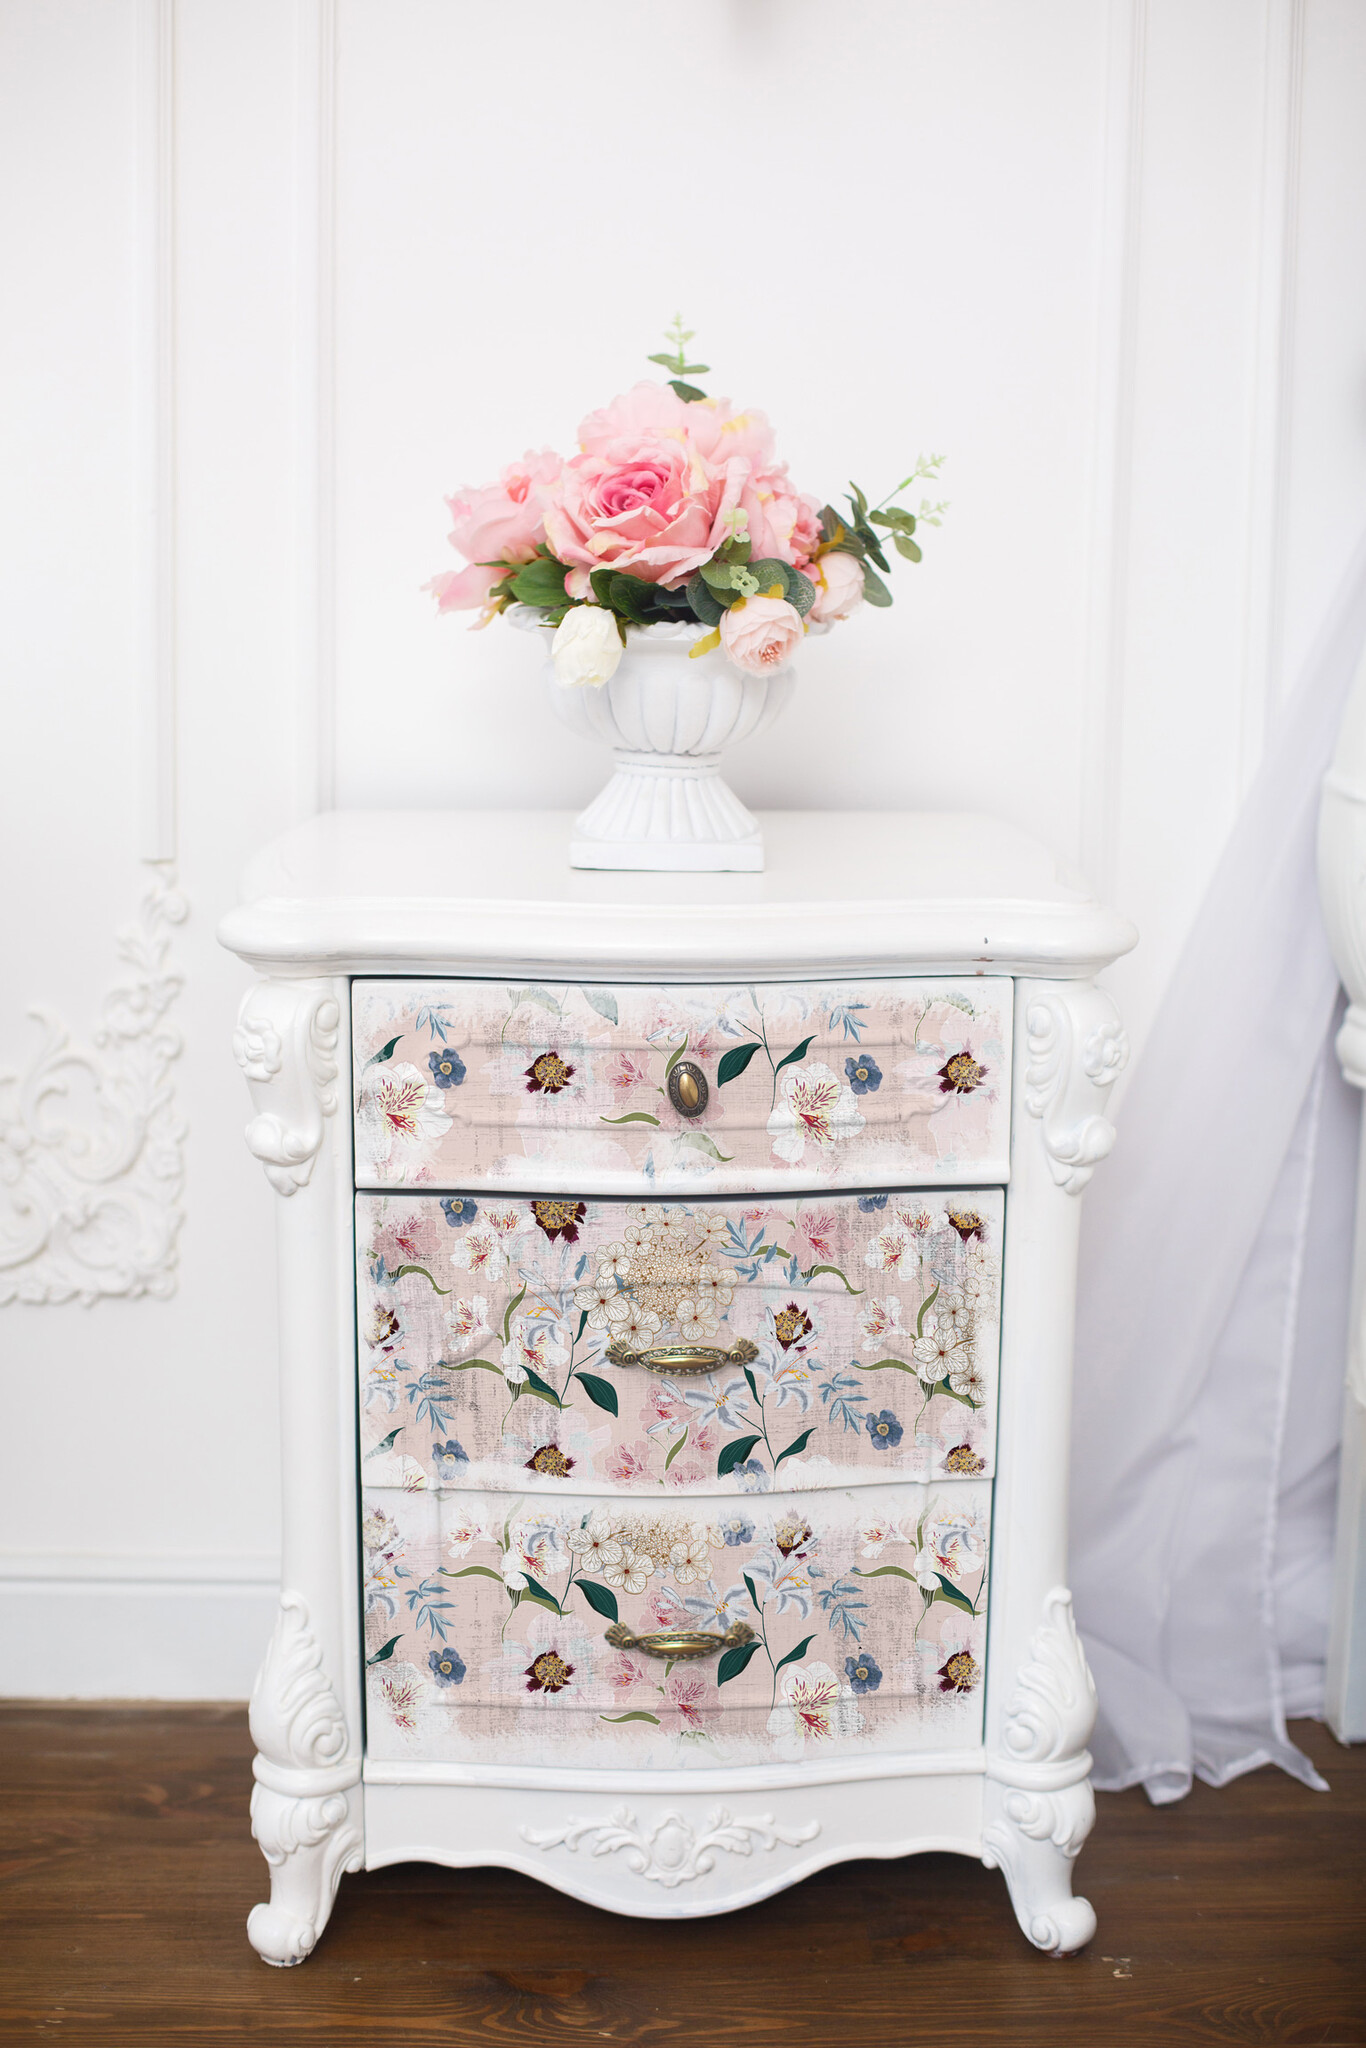 Redesign with Prima Redesign - Decoupage Tissue Paper - Blush Floral